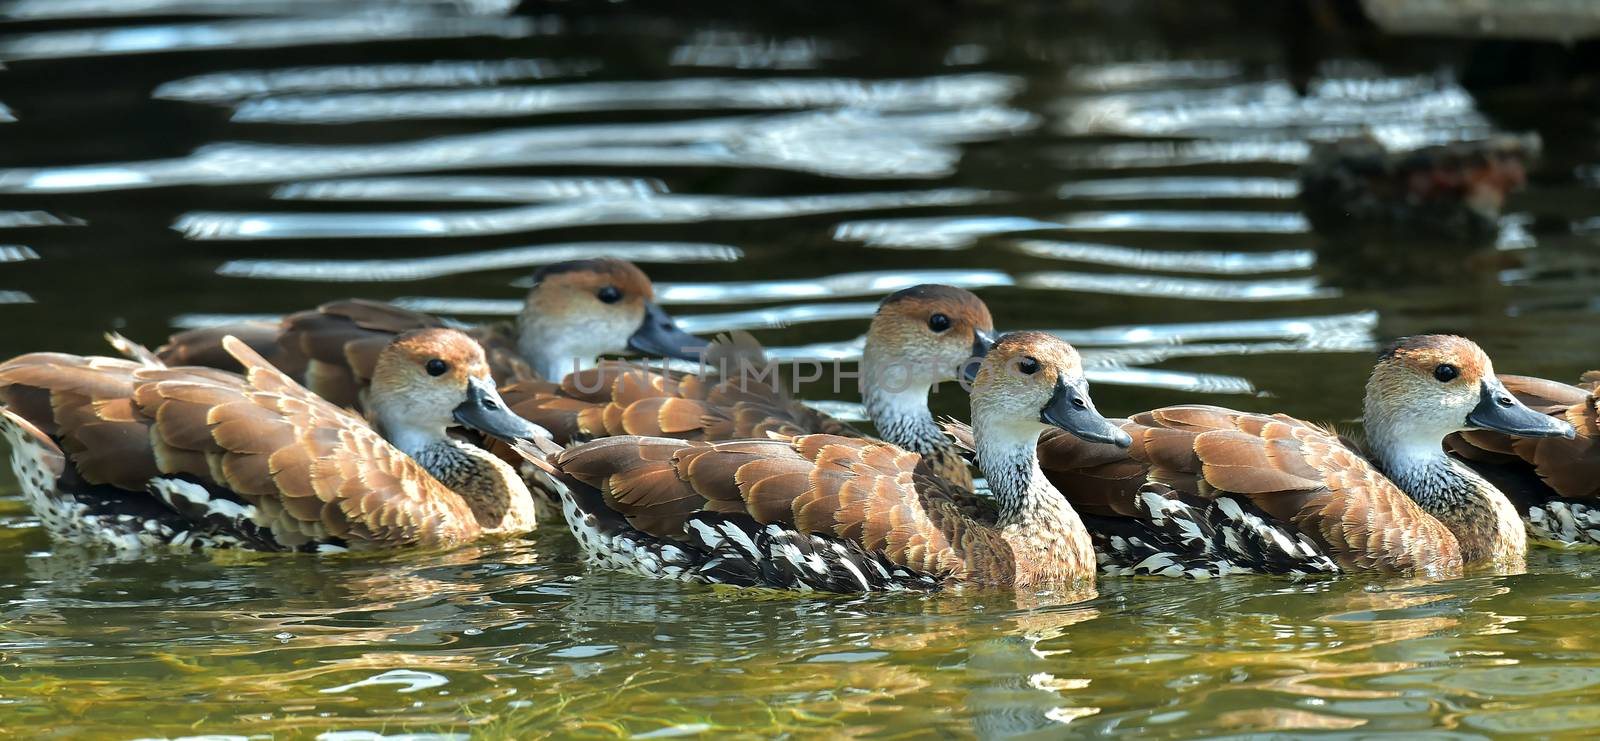 Swimming Cuban or West Indian Whistling Duck (dendrocygna arborea)